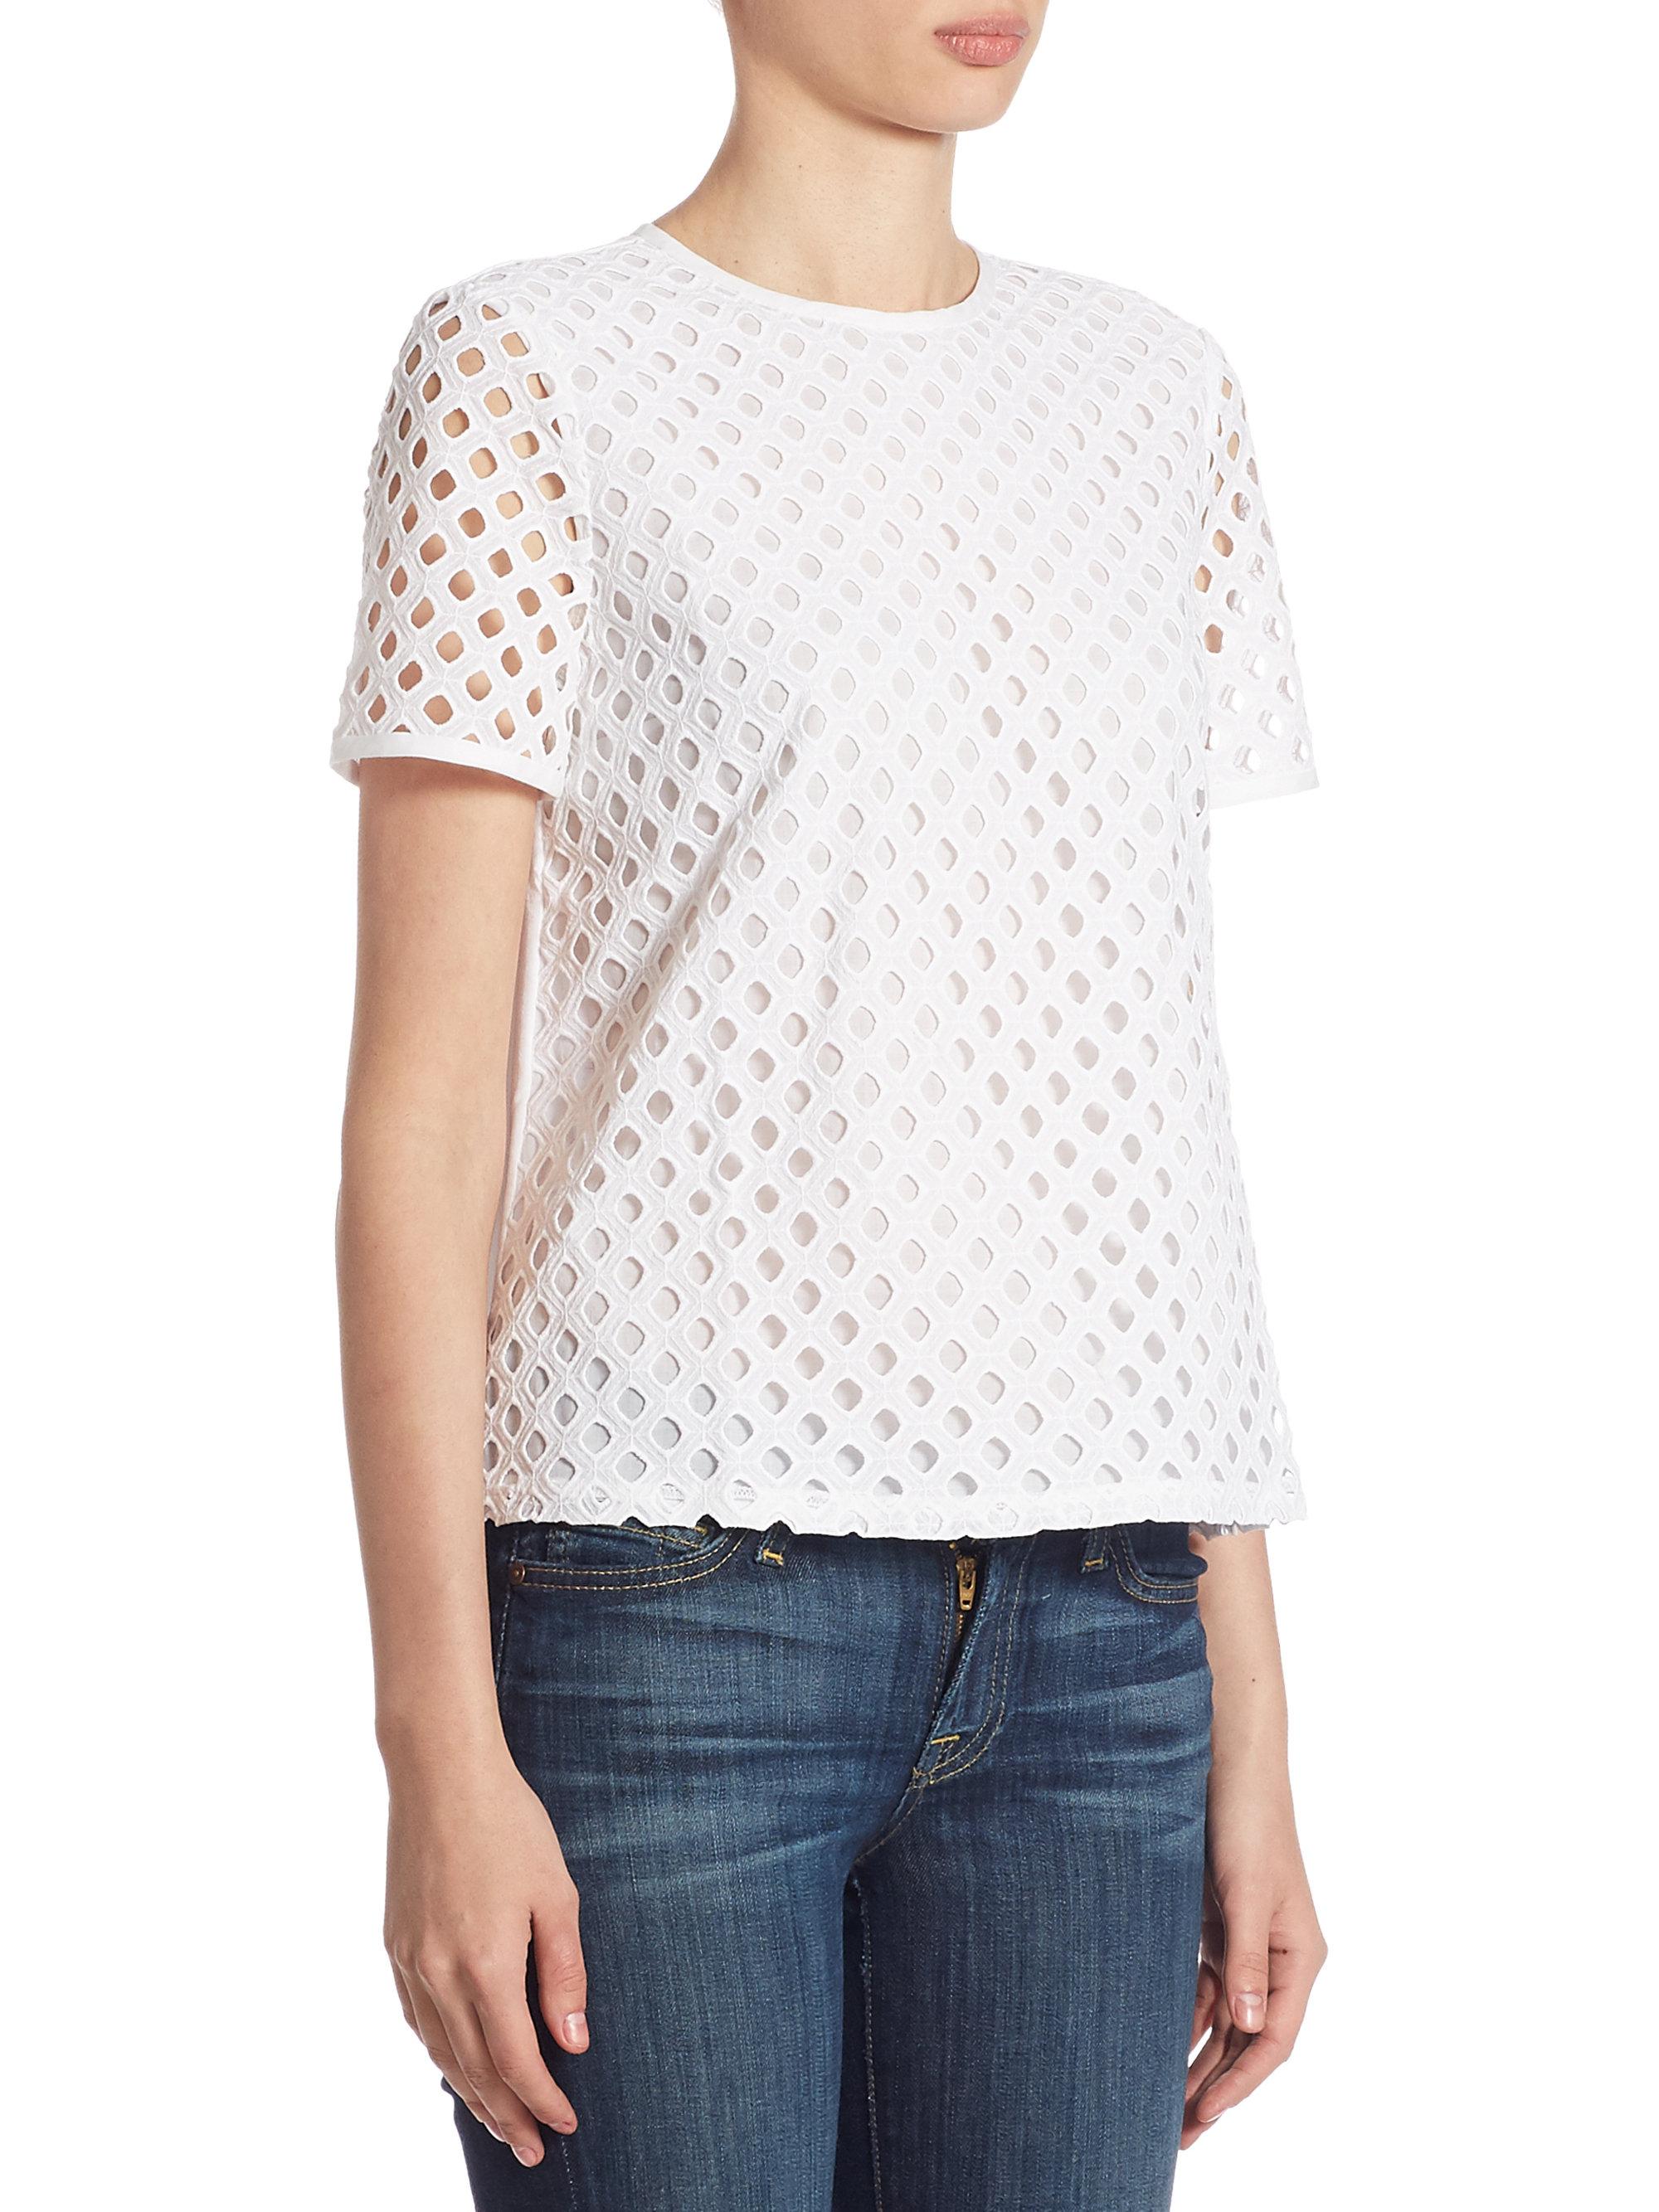 Lyst - Tory Burch Hermosa Cotton Eyelet Tee in White